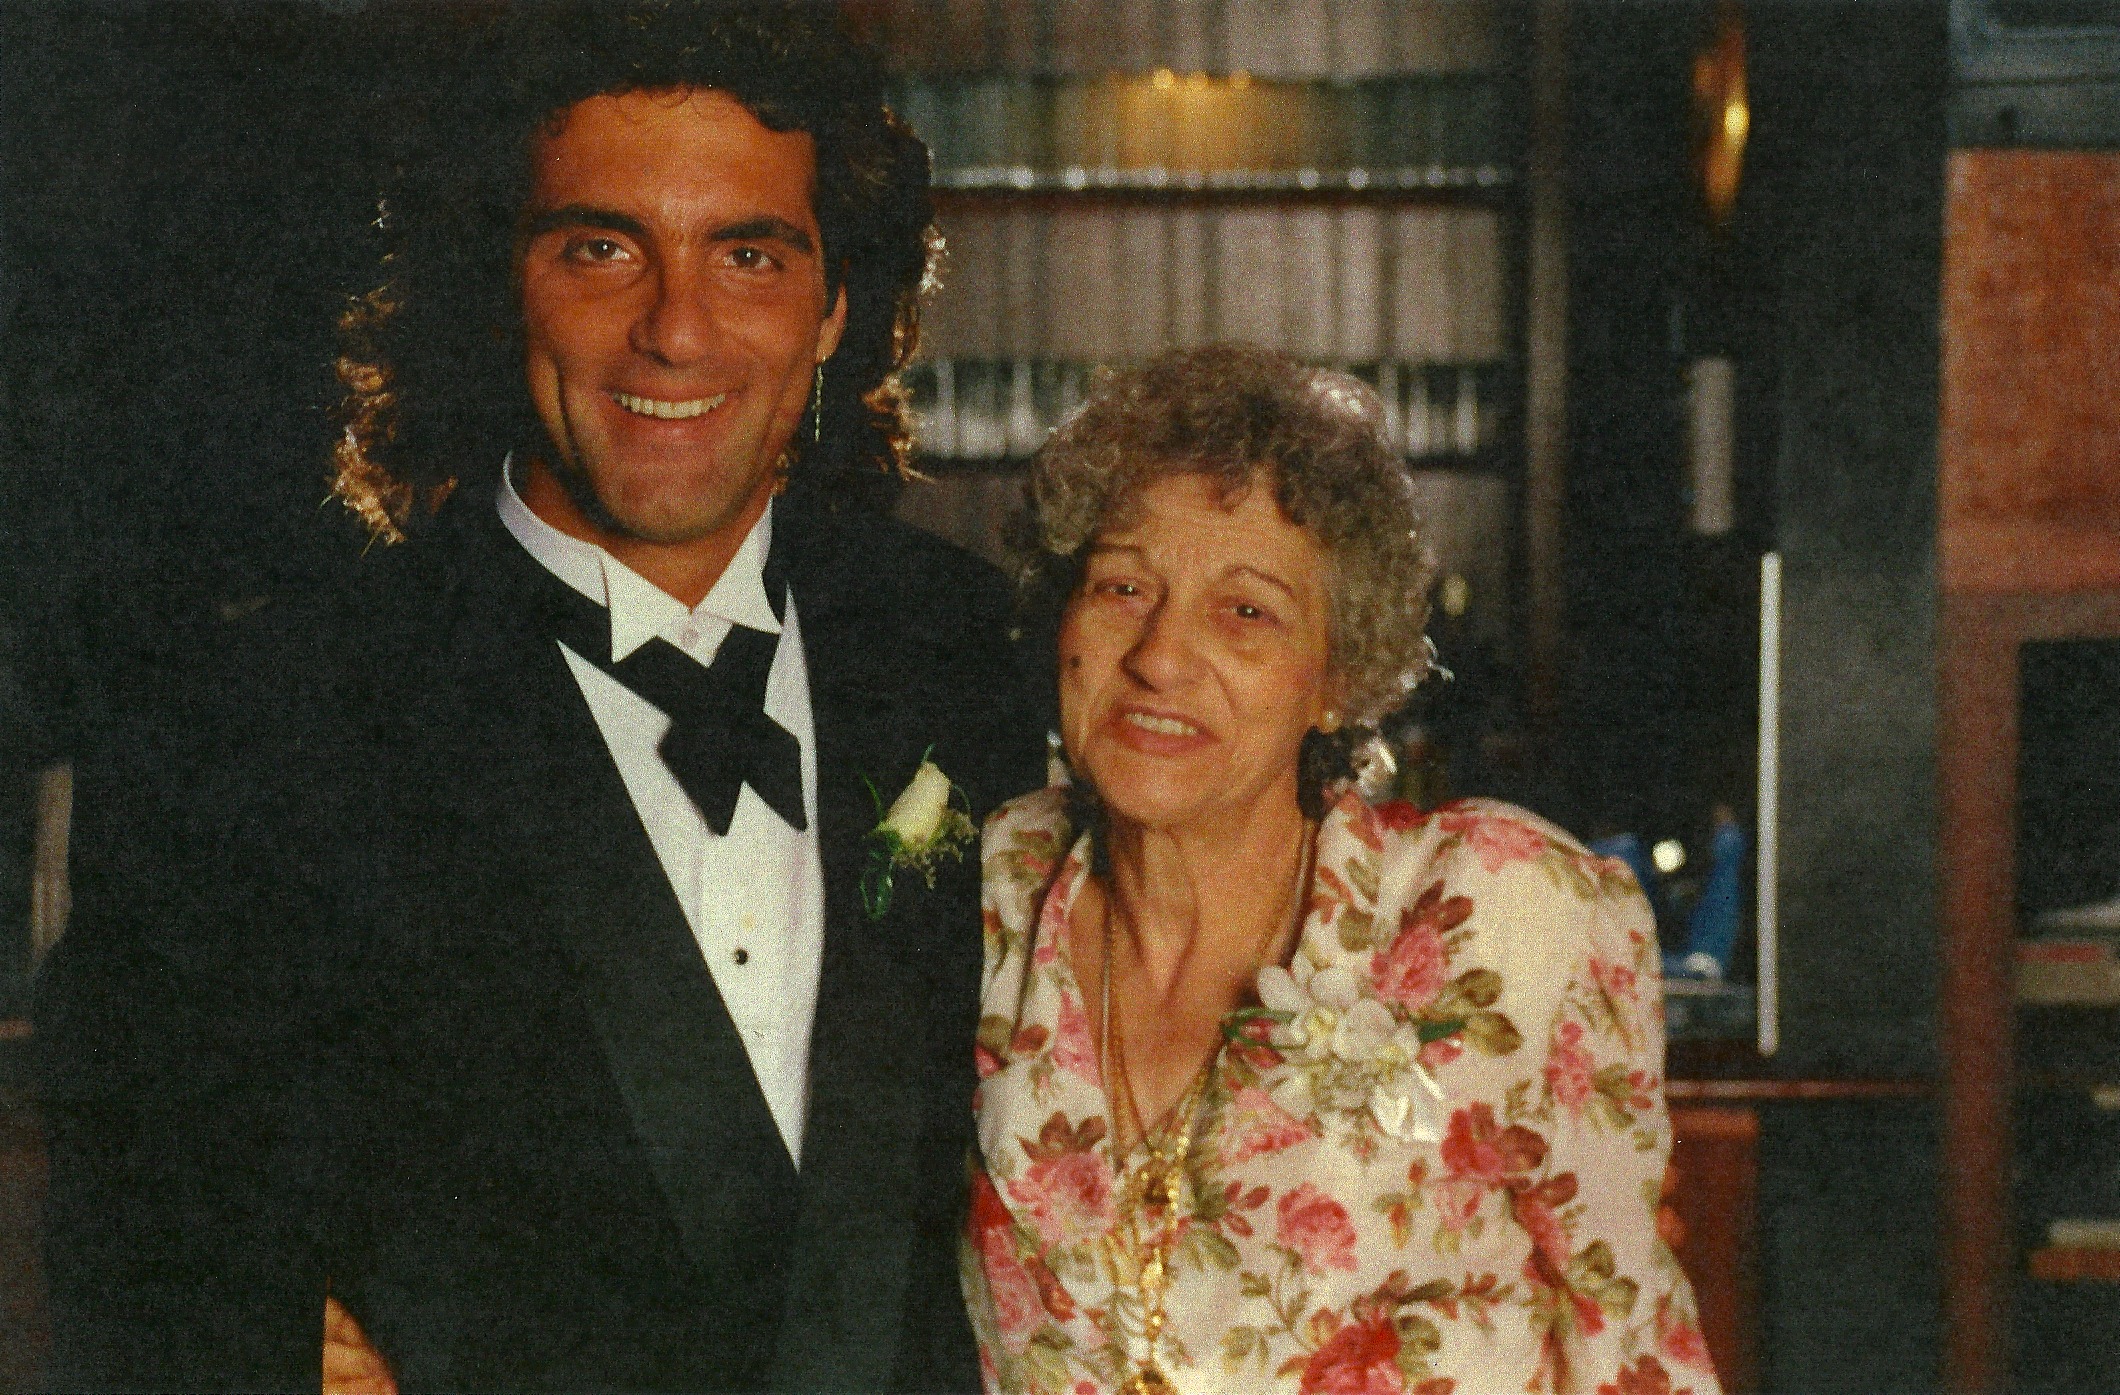 The women who inspired Richard to cook and act , Anna D'Alessandro his grandmother . So he opened two Italian restaurants in honor of her name Anna and got himself into a 6 academy award winning film 